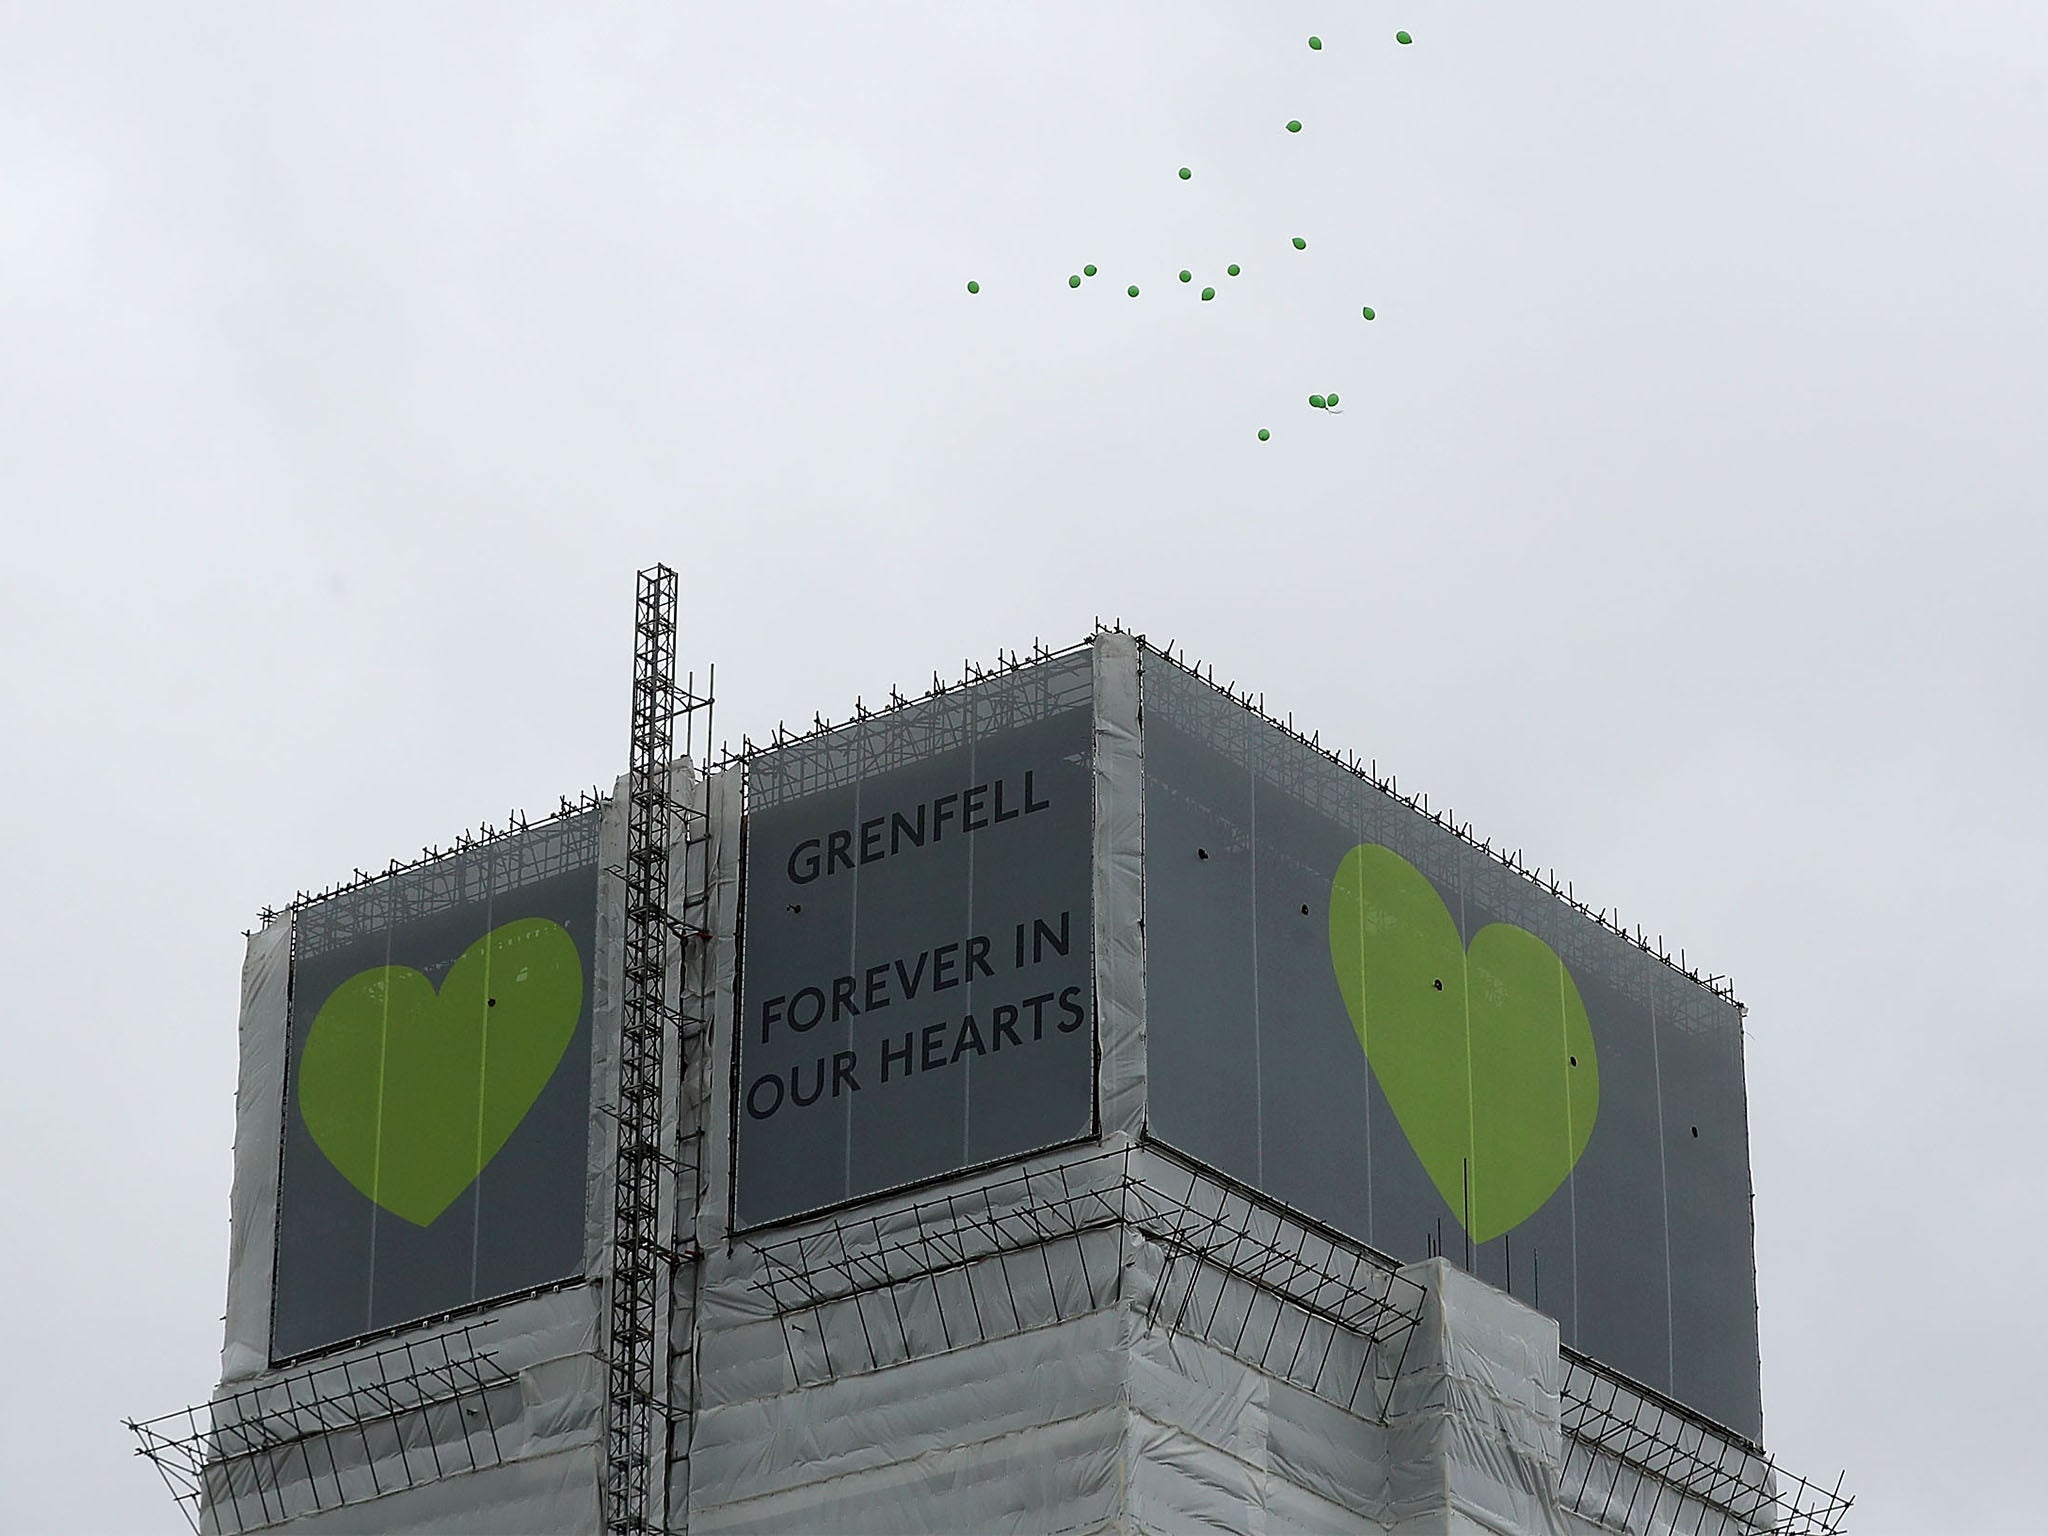 Green balloons are released over Grenfell Tower on the one year anniversary of the Grenfell Tower fire on June 14, 2018 in London, England. In one of Britain's worst urban tragedies since World War II, a devastating fire broke out in the 24-storey Grenfell Tower on June 14, 2017 where 72 people died from the blaze in the public housing building of North Kensington area of London.